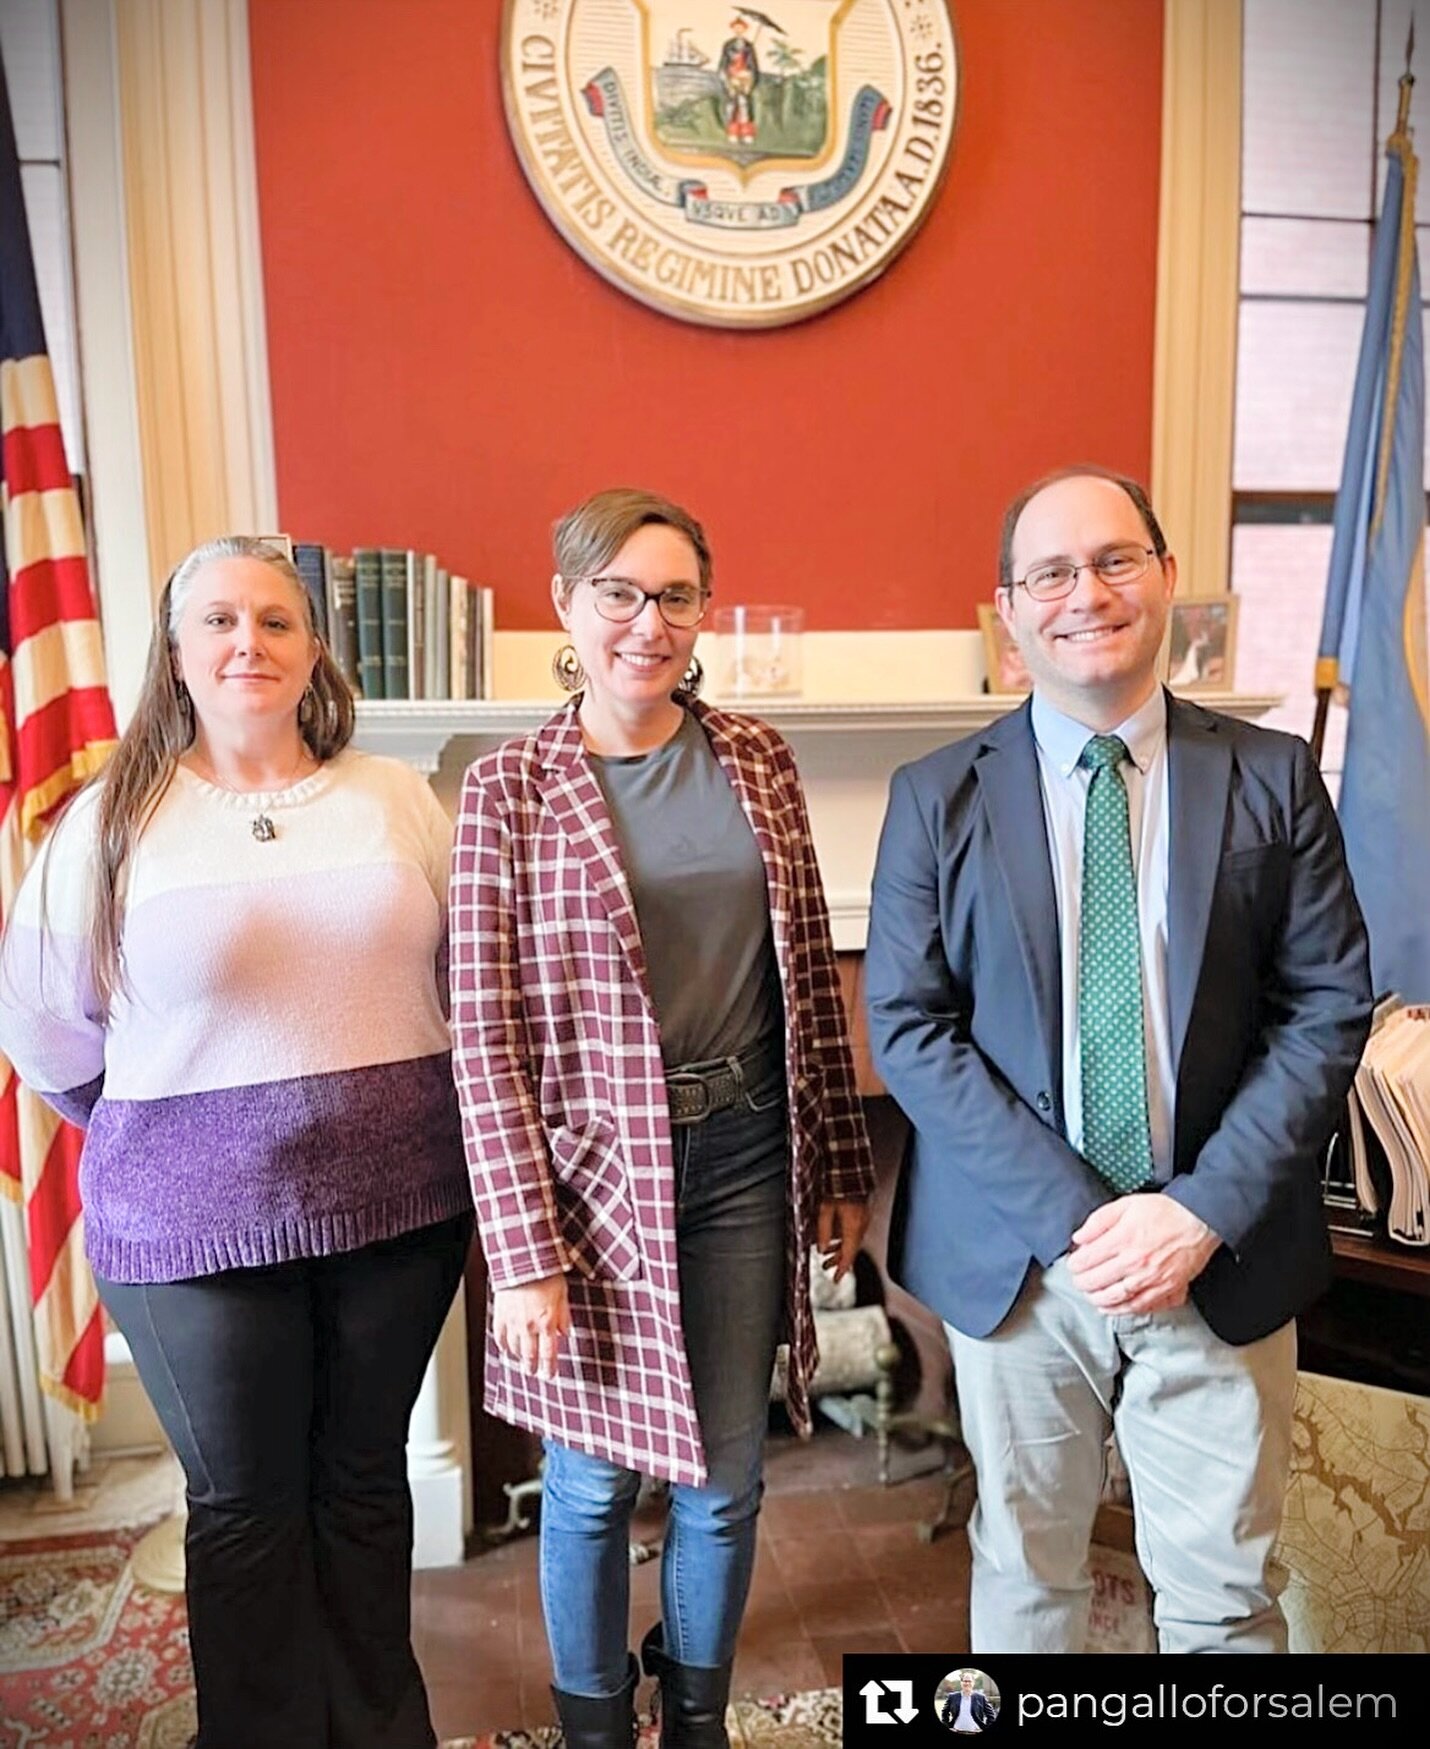 Repost from @pangalloforsalem
So honored to have met the @cityofsalem mayor Dominick Pangallo and his staff. Can&rsquo;t wait to get started @salempublicartist 
&bull;
Welcome to our 2024 Public Artist in Residence, Julia Csek&ouml; - so excited to s